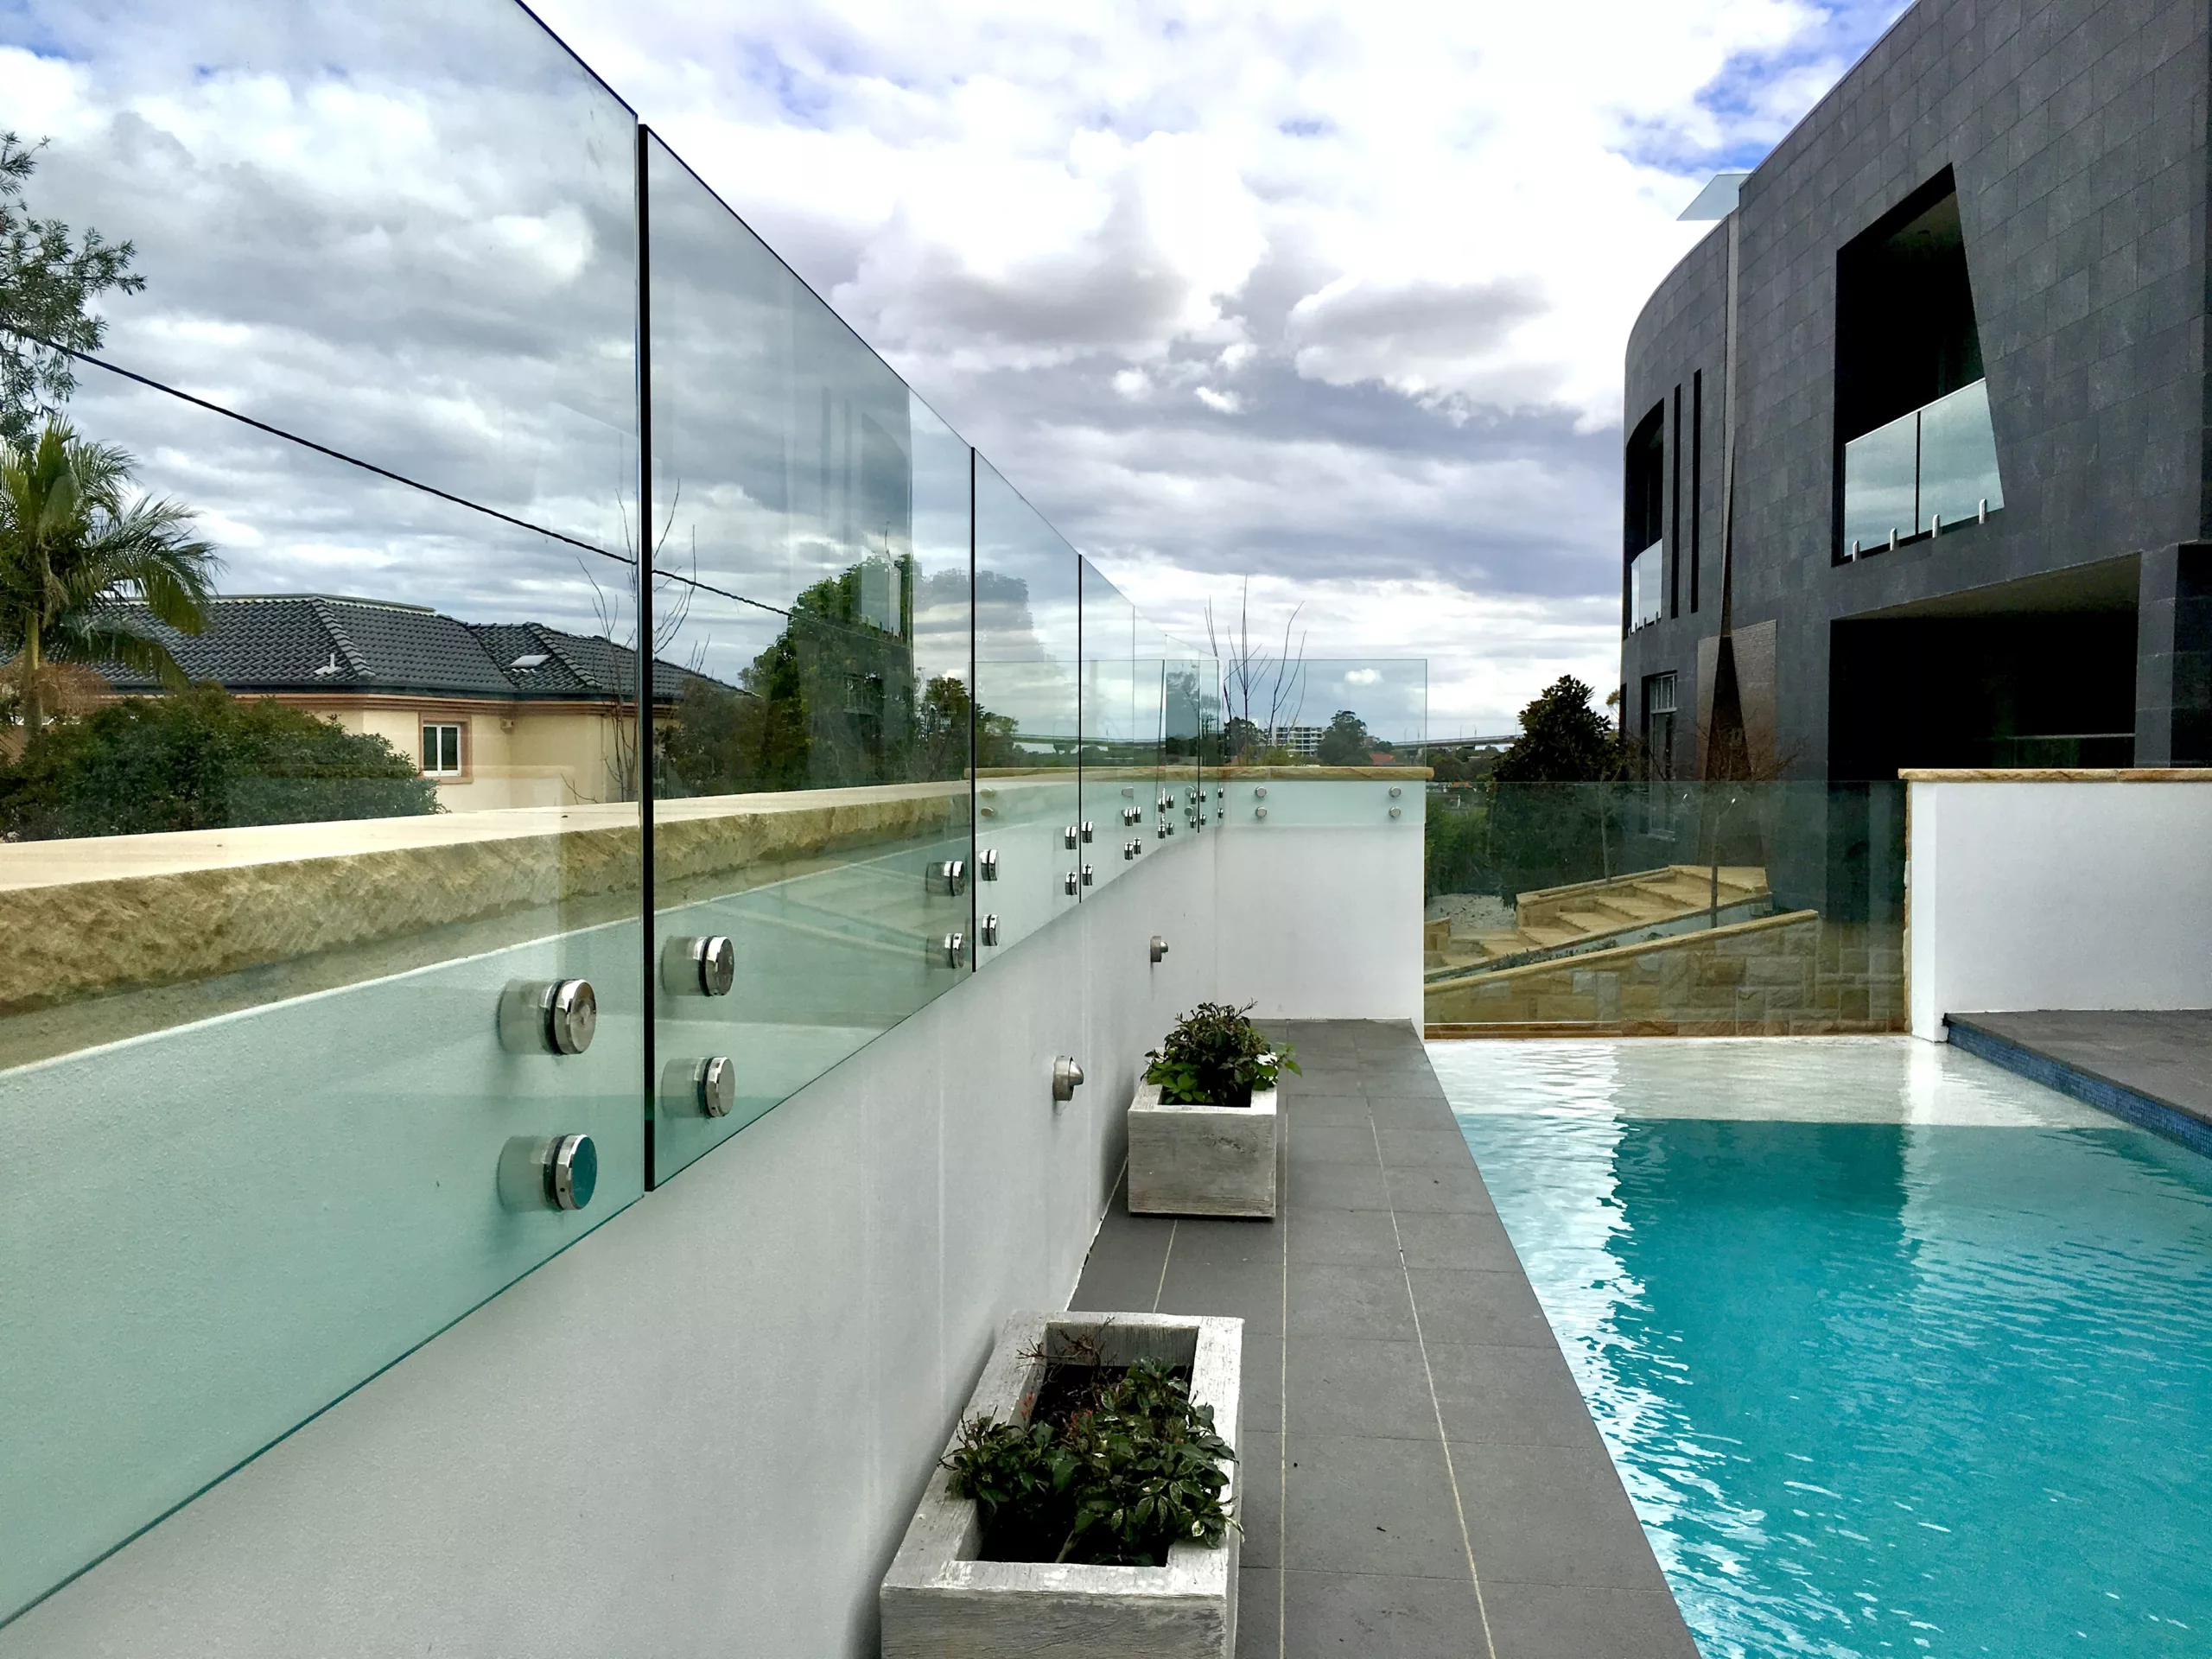 Face fixed frameless glass pool fence